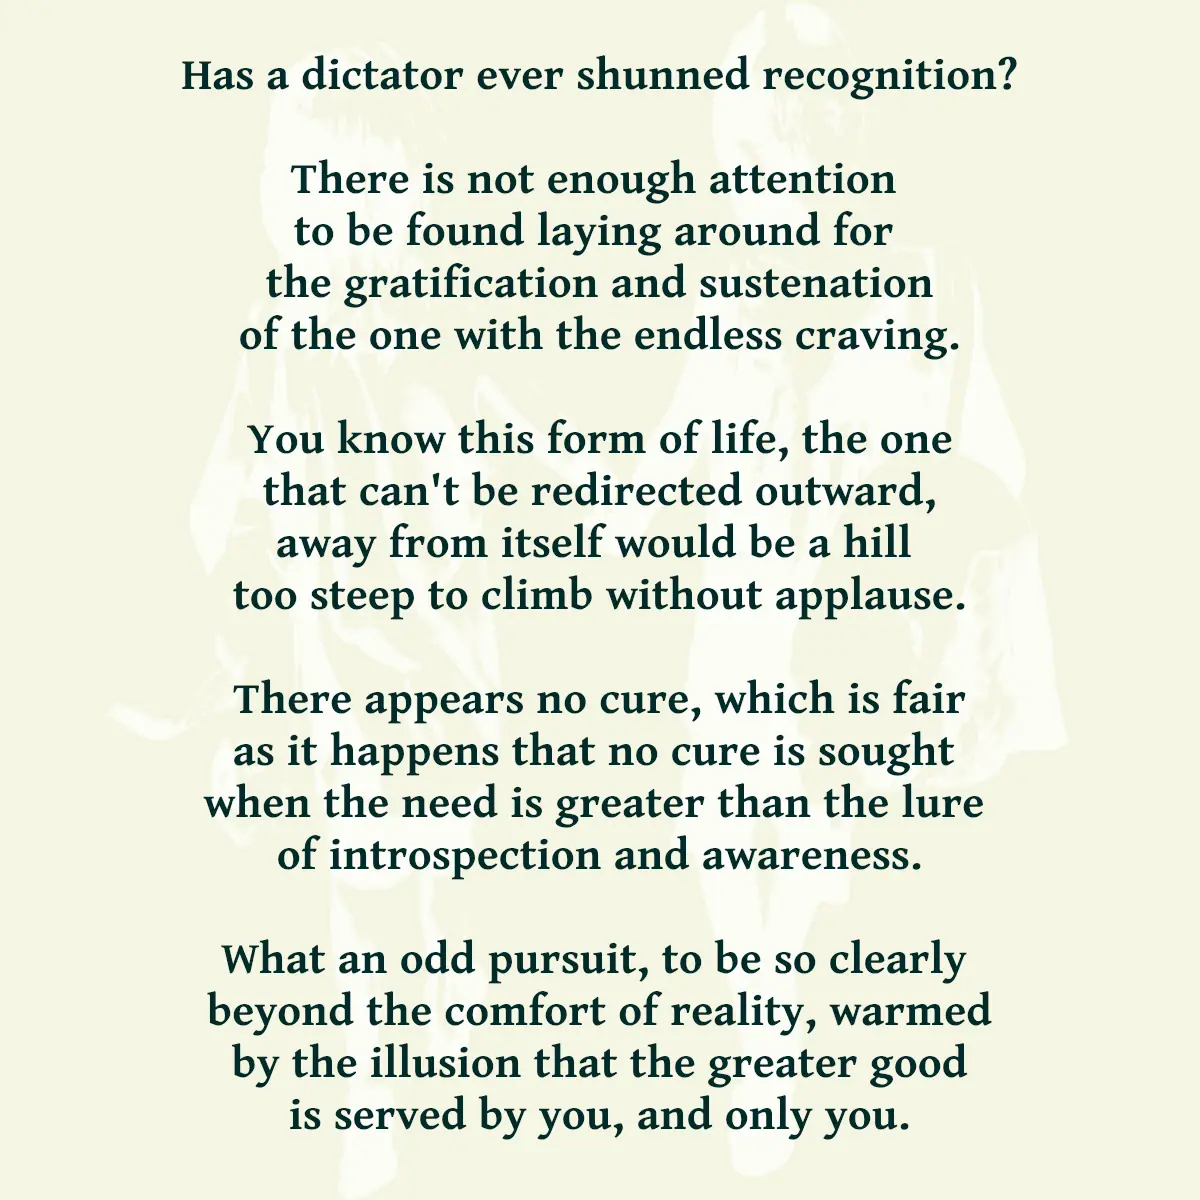 Has a dictator ever shunned recognition? There is not enough attention to be found laying around for the gratification and sustenation of the one with the endless craving. You know this form of life, the one that can't be redirected outward, away from itself would be a hill to steep to climb without applause. There appears no cure, which is fair as it happens that no cure is sought when the need is greater than the lure of introspection and awareness. What an odd pursuit, to be so clearly beyond the comfort of reality, warmed by the illusion that the greater good is served by you, and only you. Has a dictator ever shunned recognition? There is not enough attention to be found laying around for the gratification and sustenation of the one with the endless craving. You know this form of life, the one that can't be redirected outward, away from itself would be a hill to steep to climb without applause. There appears no cure, which is fair as it happens that no cure is sought when the need is greater than the lure of introspection and awareness. What an odd pursuit, to be so clearly beyond the comfort of reality, warmed by the illusion that the greater good is served by you, and only you. Has a dictator ever shunned recognition? There is not enough attention to be found laying around for the gratification and sustenation of the one with the endless craving. You know this form of life, the one that can't be redirected outward, away from itself would be a hill to steep to climb without applause. There appears no cure, which is fair as it happens that no cure is sought when the need is greater than the lure of introspection and awareness. What an odd pursuit, to be so clearly beyond the comfort of reality, warmed by the illusion that the greater good is served by you, and only you. Has a dictator ever shunned recognition? There is not enough attention to be found laying around for the gratification and sustenation of the one with the endless craving. You know this form of life, the one that can't be redirected outward, away from itself would be a hill to steep to climb without applause. There appears no cure, which is fair as it happens that no cure is sought when the need is greater than the lure of introspection and awareness. What an odd pursuit, to be so clearly beyond the comfort of reality, warmed by the illusion that the greater good is served by you, and only you. Has a dictator ever shunned recognition? There is not enough attention to be found laying around for the gratification and sustenation of the one with the endless craving. You know this form of life, the one that can't be redirected outward, away from itself would be a hill to steep to climb without applause. There appears no cure, which is fair as it happens that no cure is sought when the need is greater than the lure of introspection and awareness. What an odd pursuit, to be so clearly beyond the comfort of reality, warmed by the illusion that the greater good is served by you, and only you. Has a dictator ever shunned recognition? There is not enough attention to be found laying around for the gratification and sustenation of the one with the endless craving. You know this form of life, the one that can't be redirected outward, away from itself would be a hill too steep to climb without applause. There appears no cure, which is fair as it happens that no cure is sought when the need is greater than the lure of introspection and awareness. What an odd pursuit, to be so clearly beyond the comfort of reality, warmed by the illusion that the greater good is served by you, and only you.